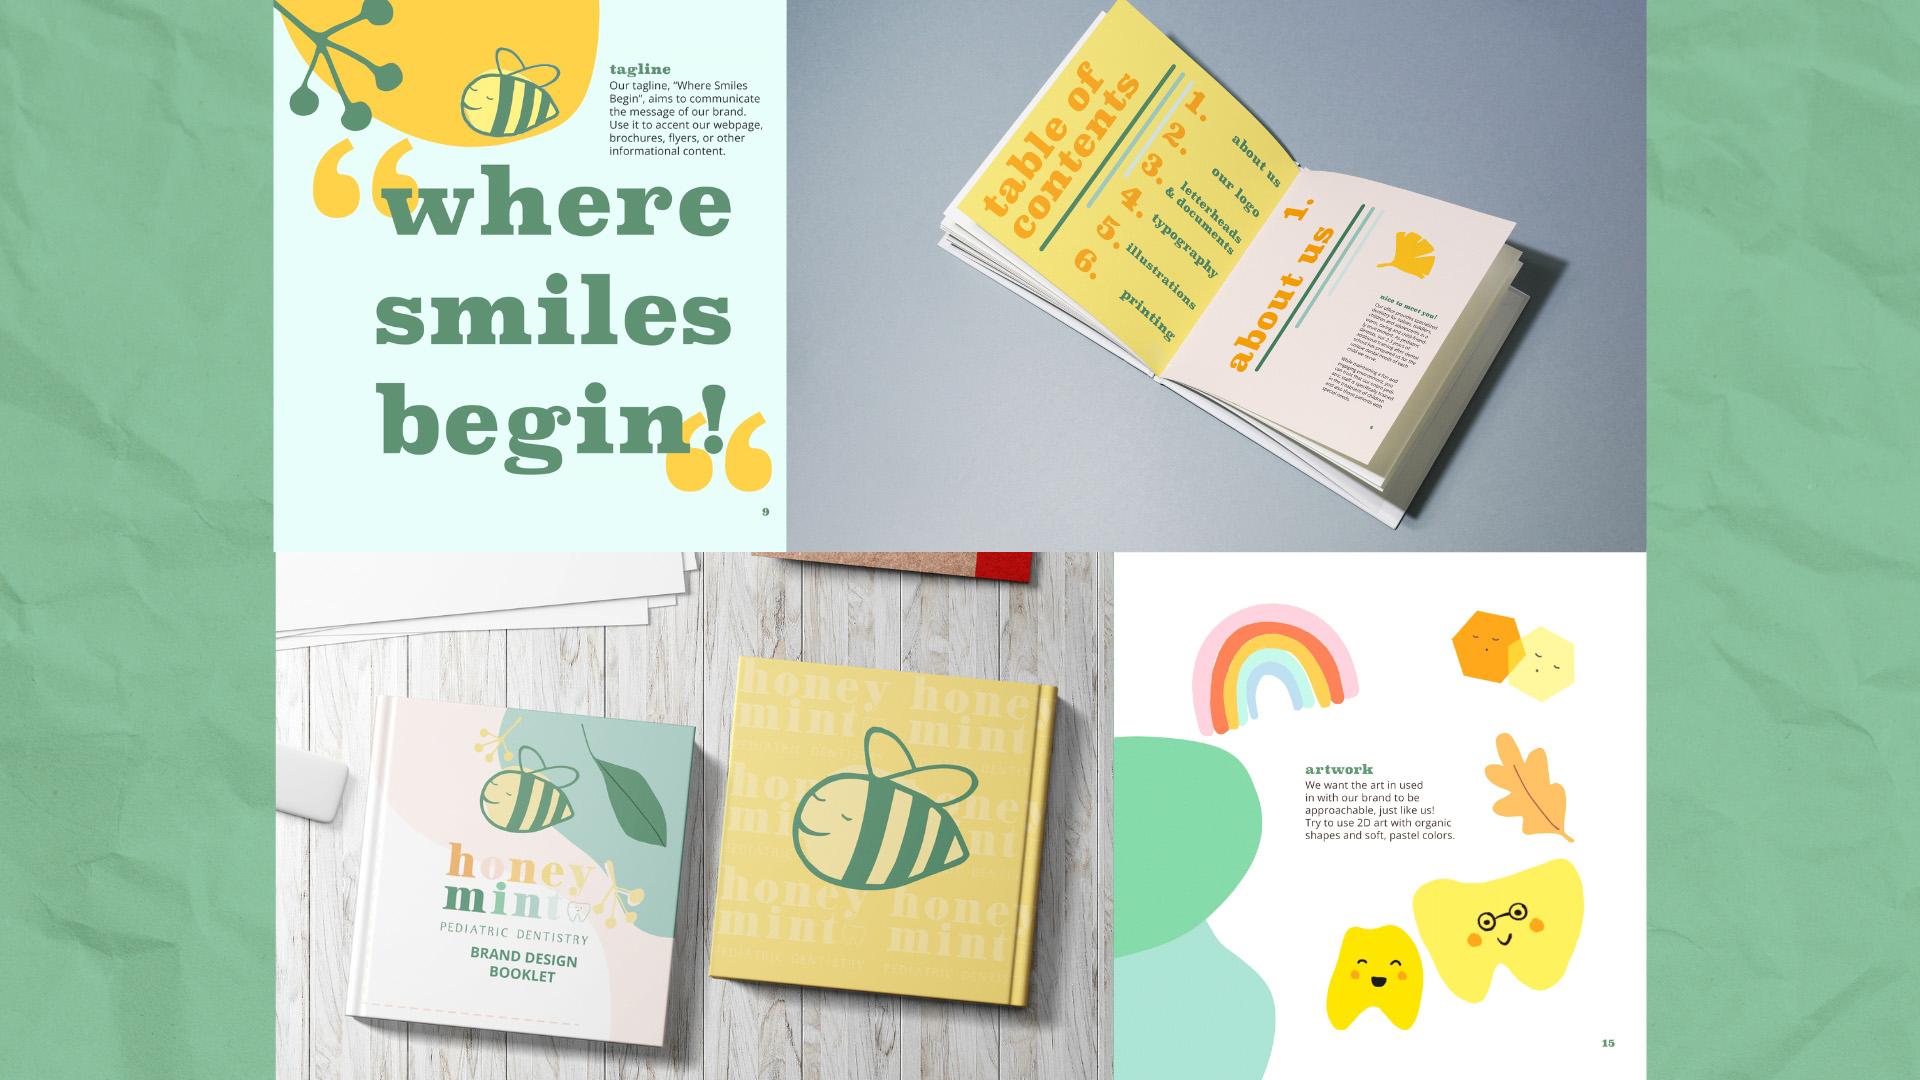 "Honey Mint Brand Guidelines Booklet" / "Honey Mint Brand Guidelines Booklet", branding booklet, 8x8 printed book, 2022. This booklet is a 28-page guide to using the branding of Oregon-based pediatric dentist, Honey Mint.